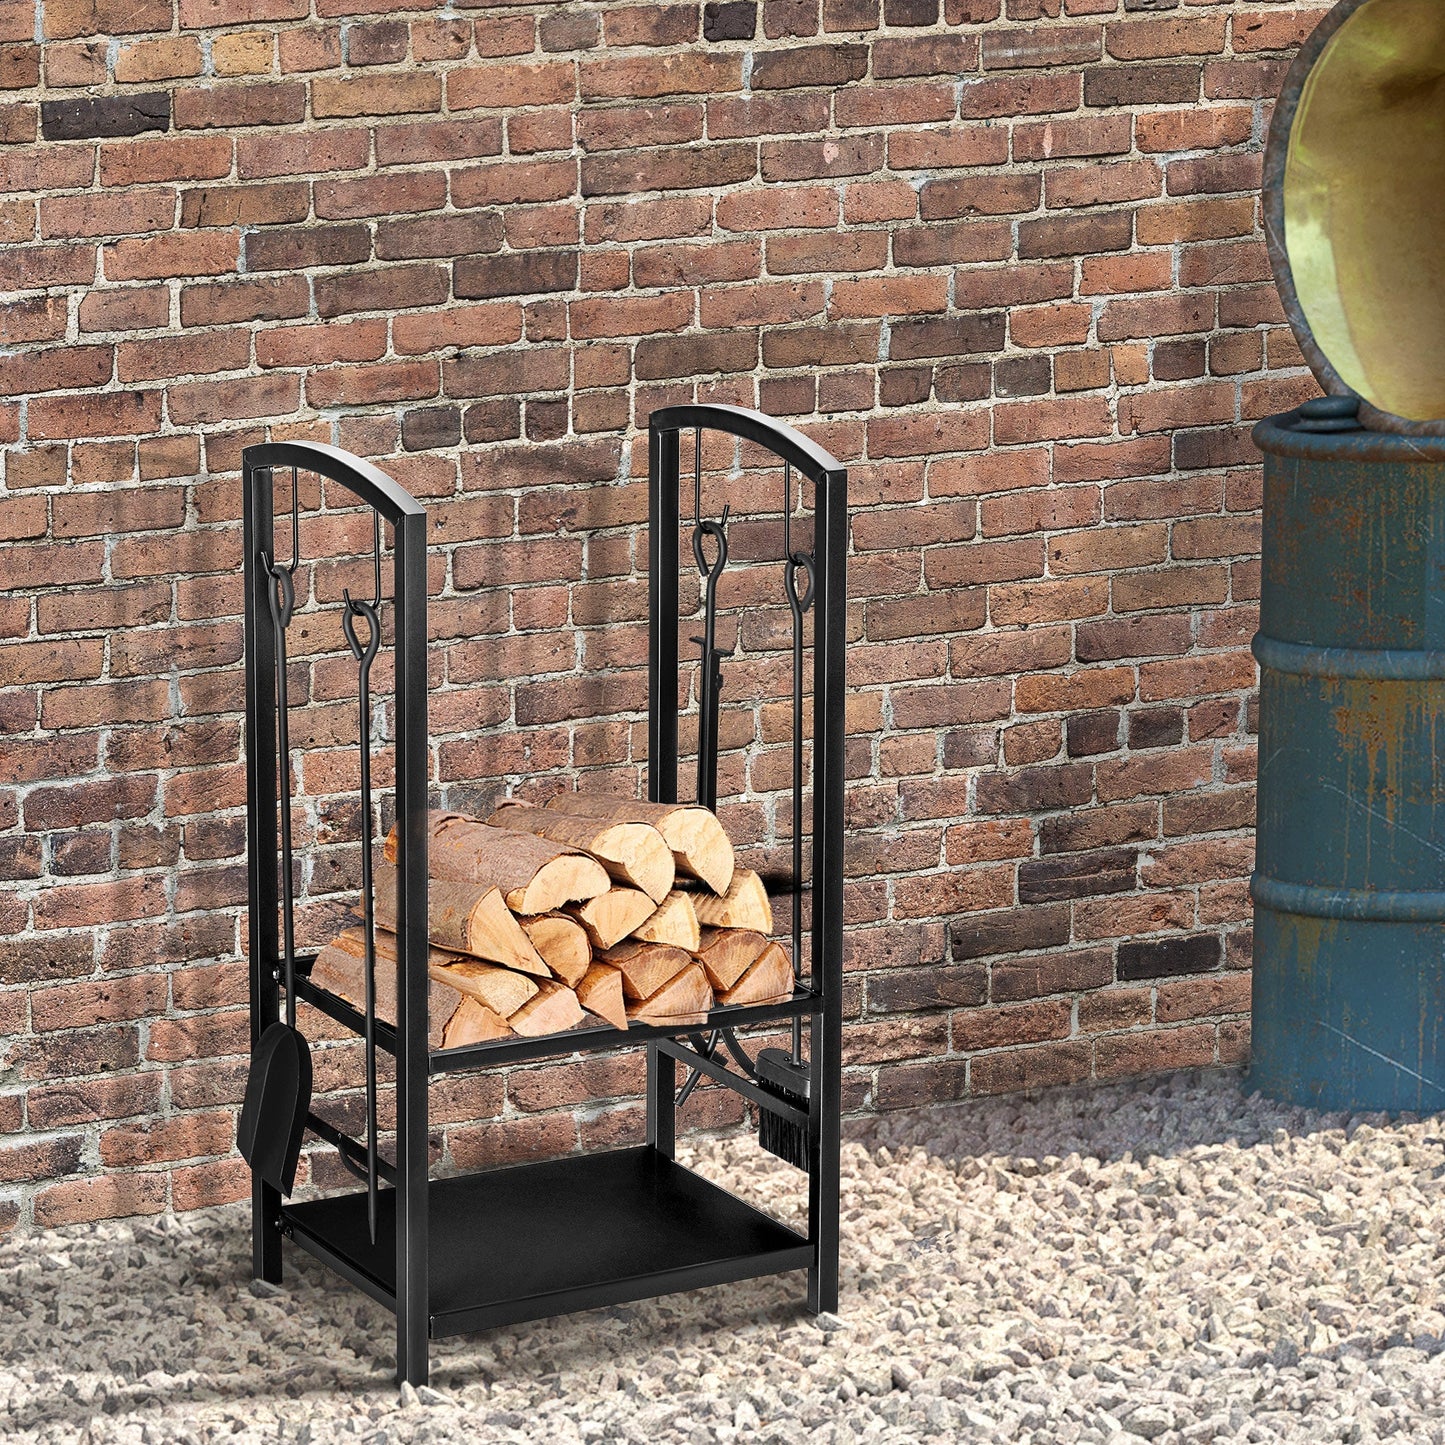 16" 2-Tier Firewood Log Rack with 4 Tools, Fireplace Wood Storage Holder with Shovel, Broom, Poker, Tongs and Hooks, Black at Gallery Canada